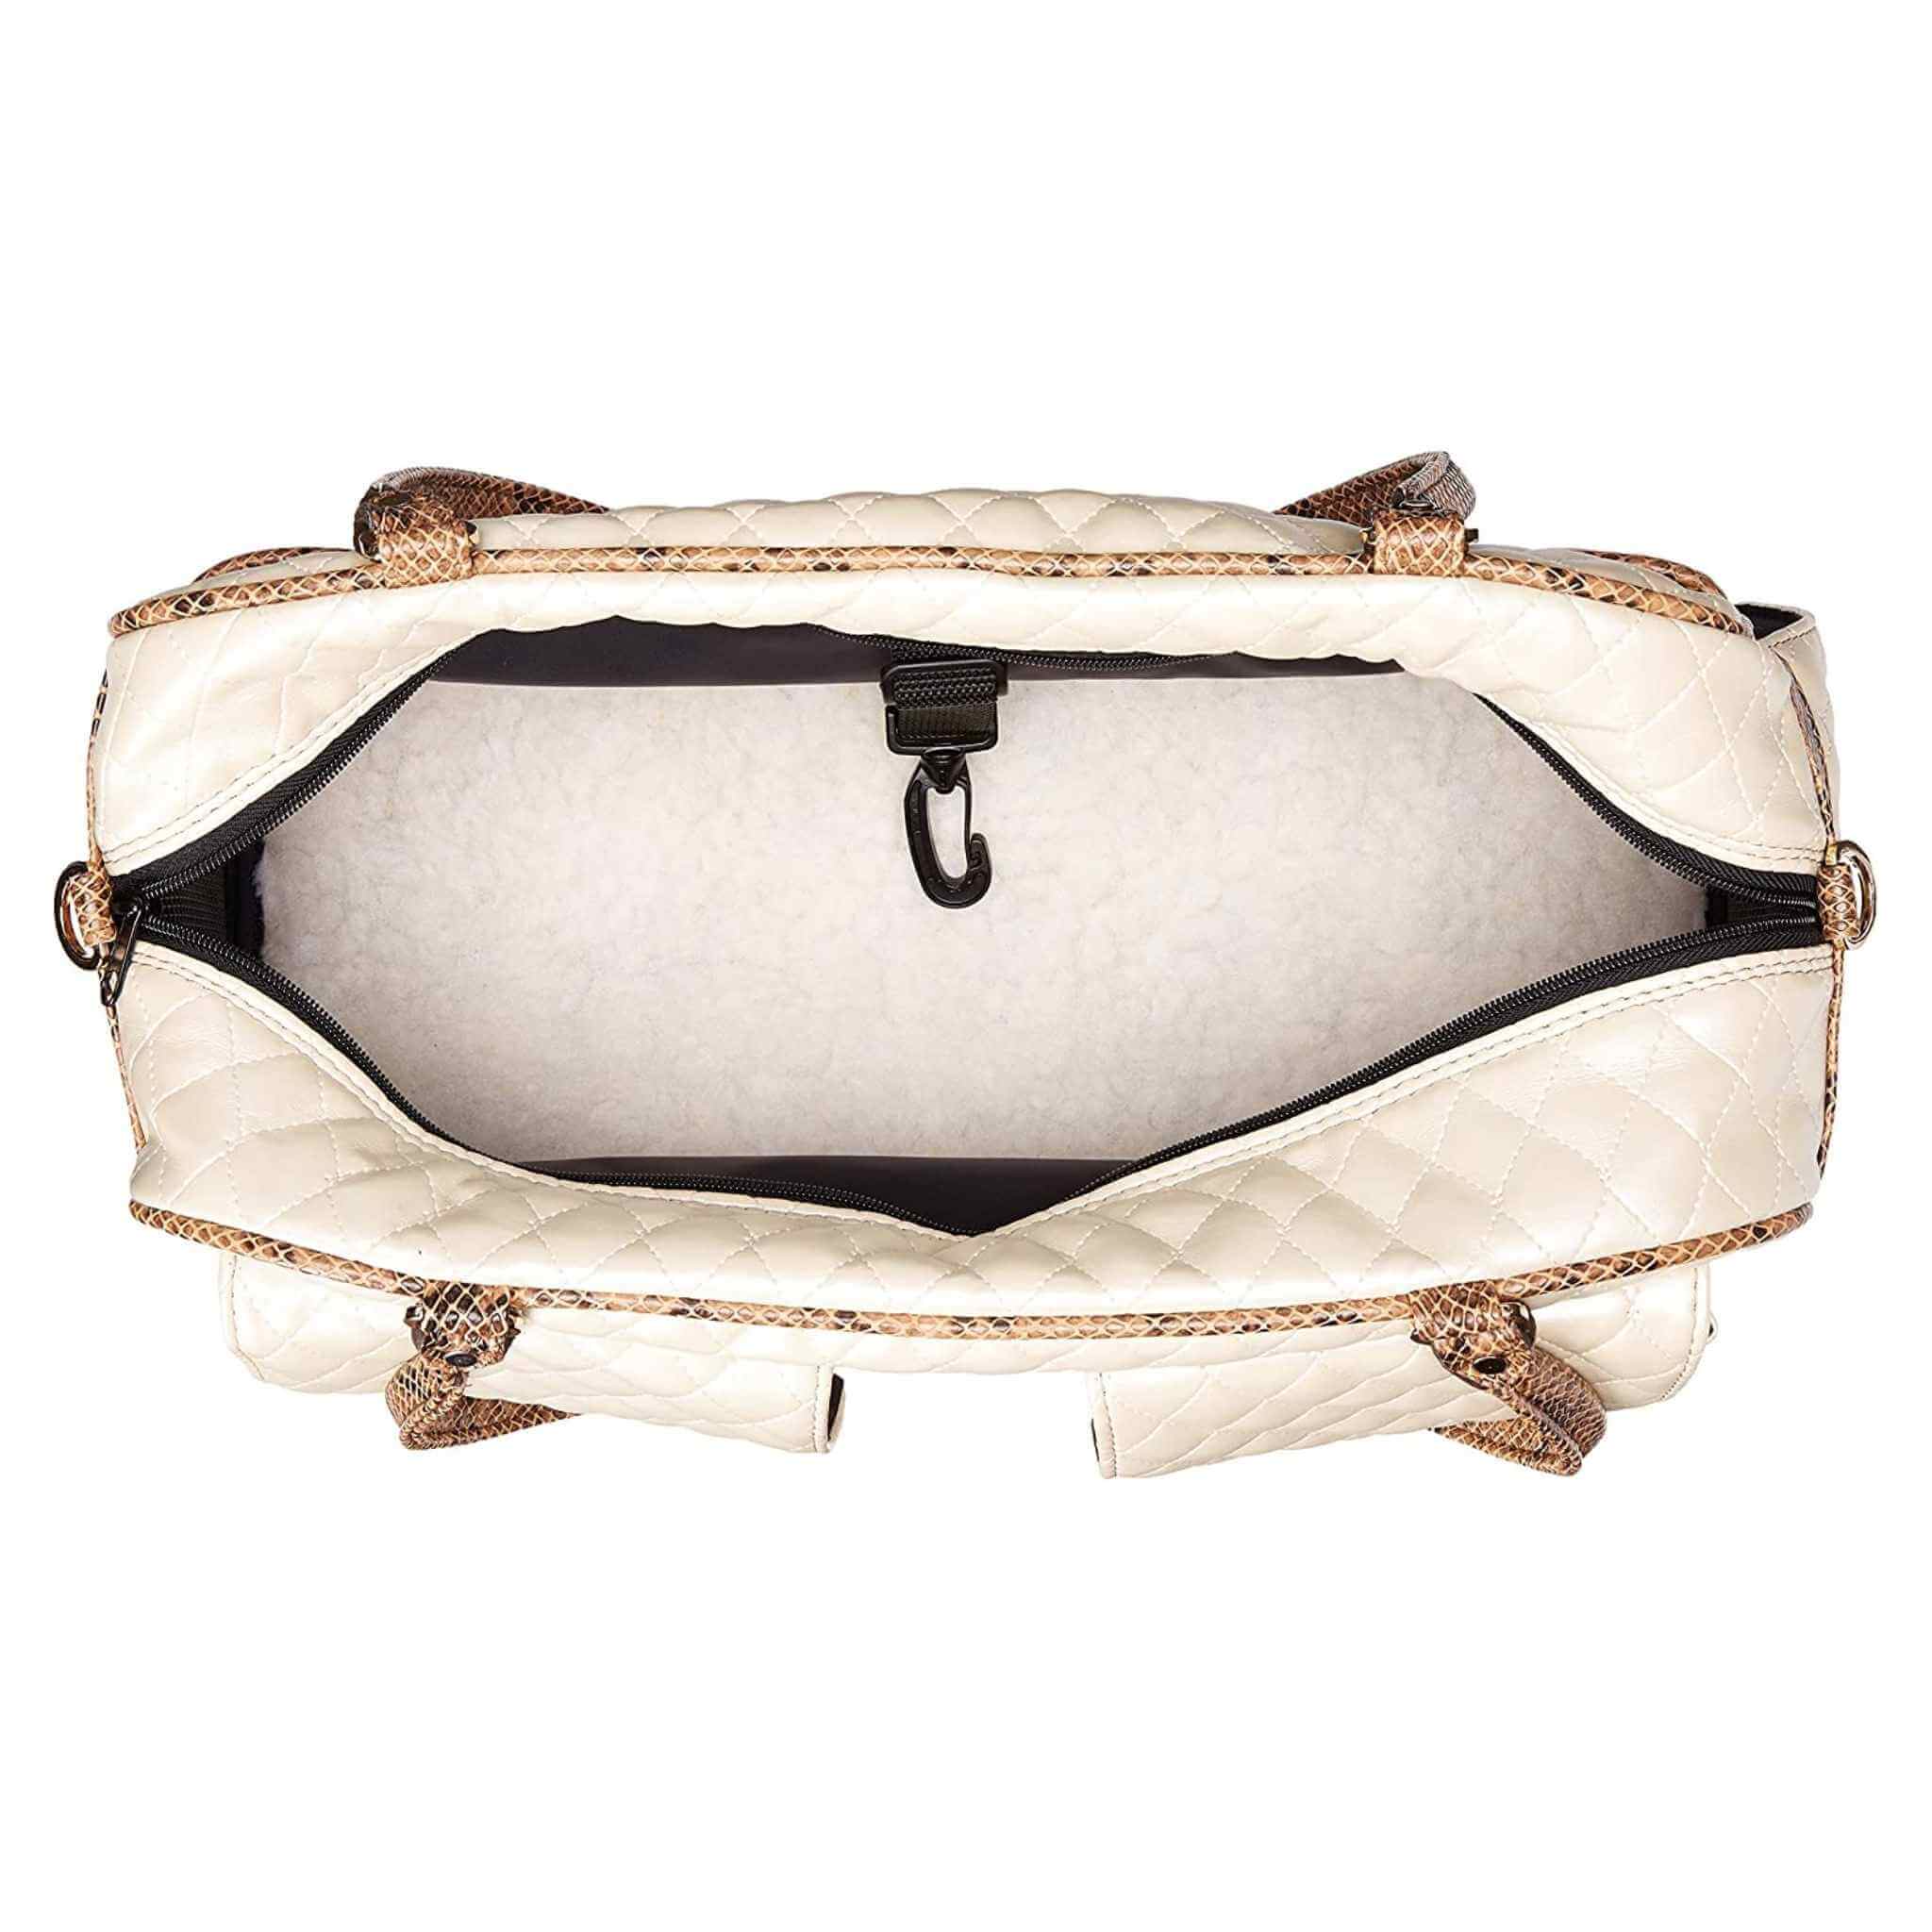 Payton Dog Carrier by PETote - Khaki  Designer Dog Carriers at